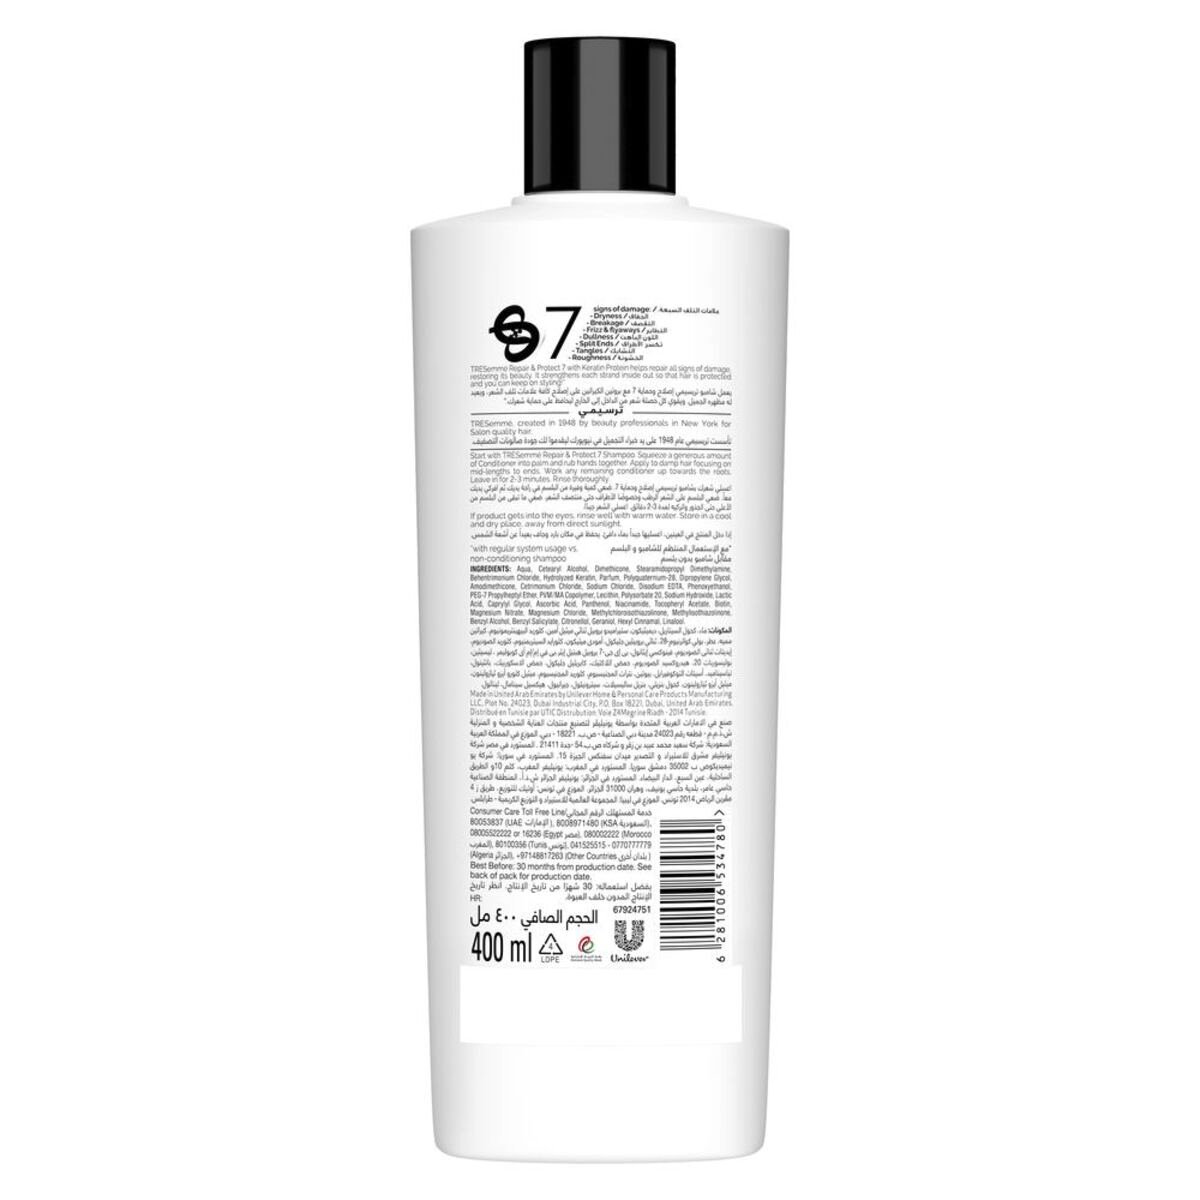 TRESemme Repair & Protect Conditioner with Biotin for Dry & Damaged Hair 400 ml